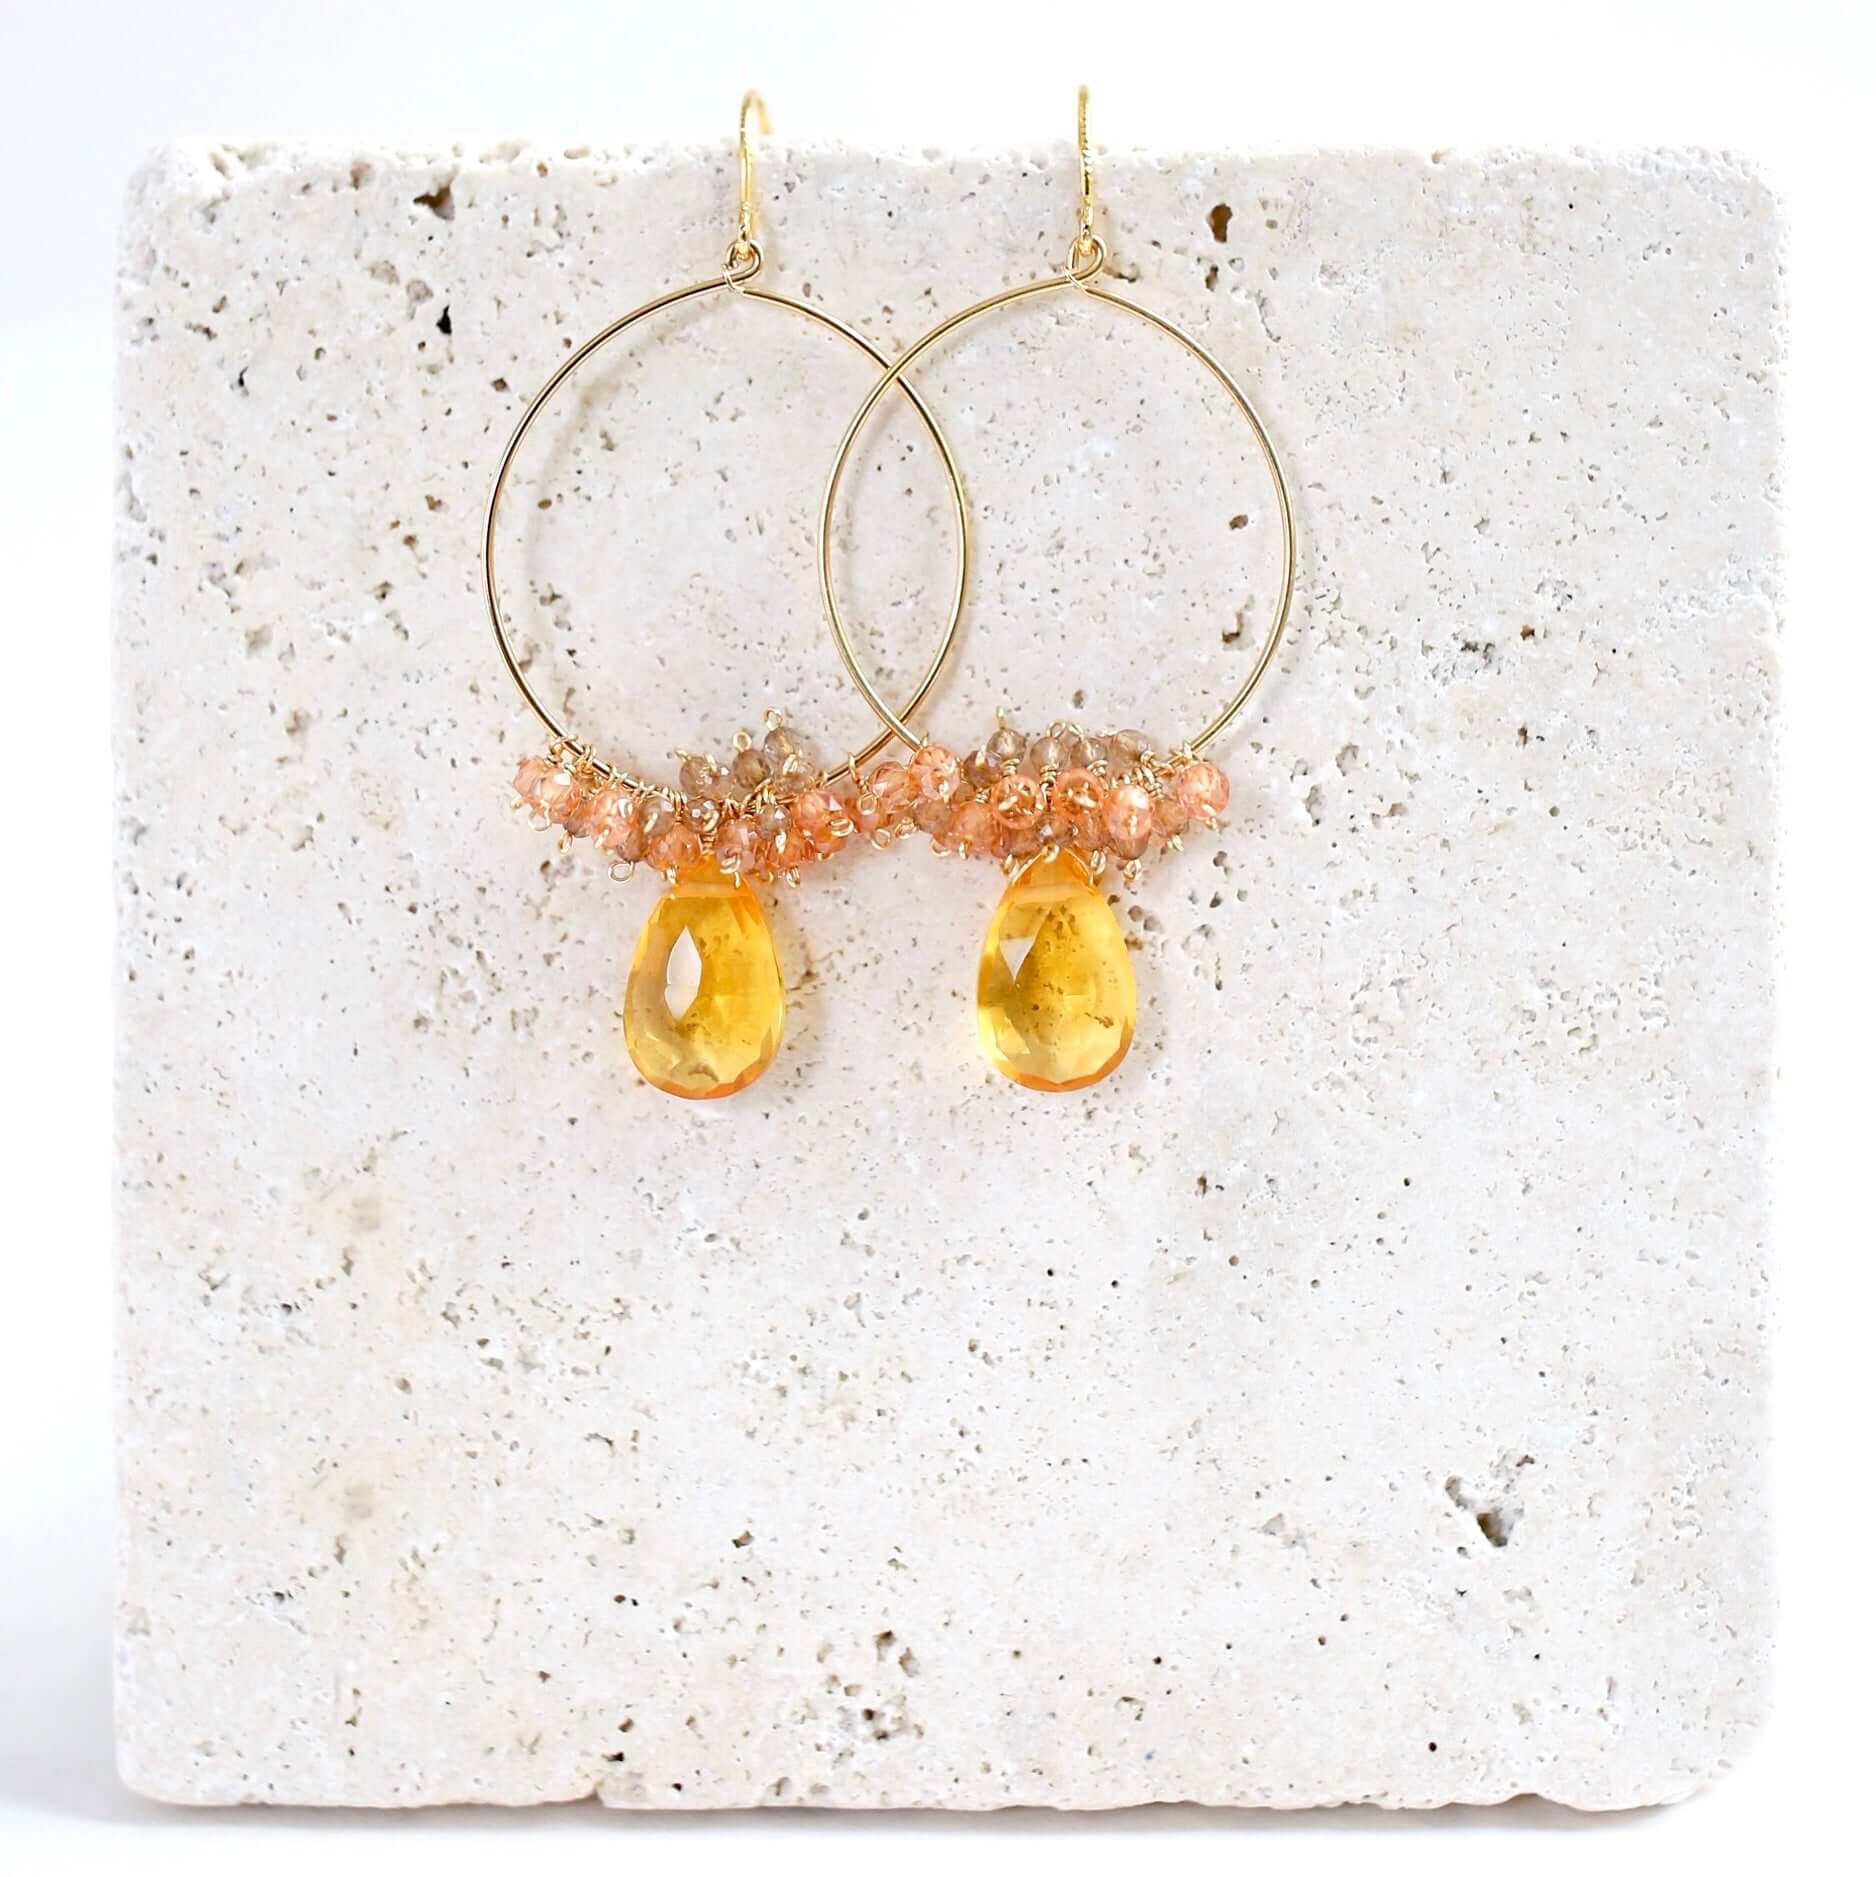 Easy-to-Wear Swing Earrings with Citrine Gemstone Charms